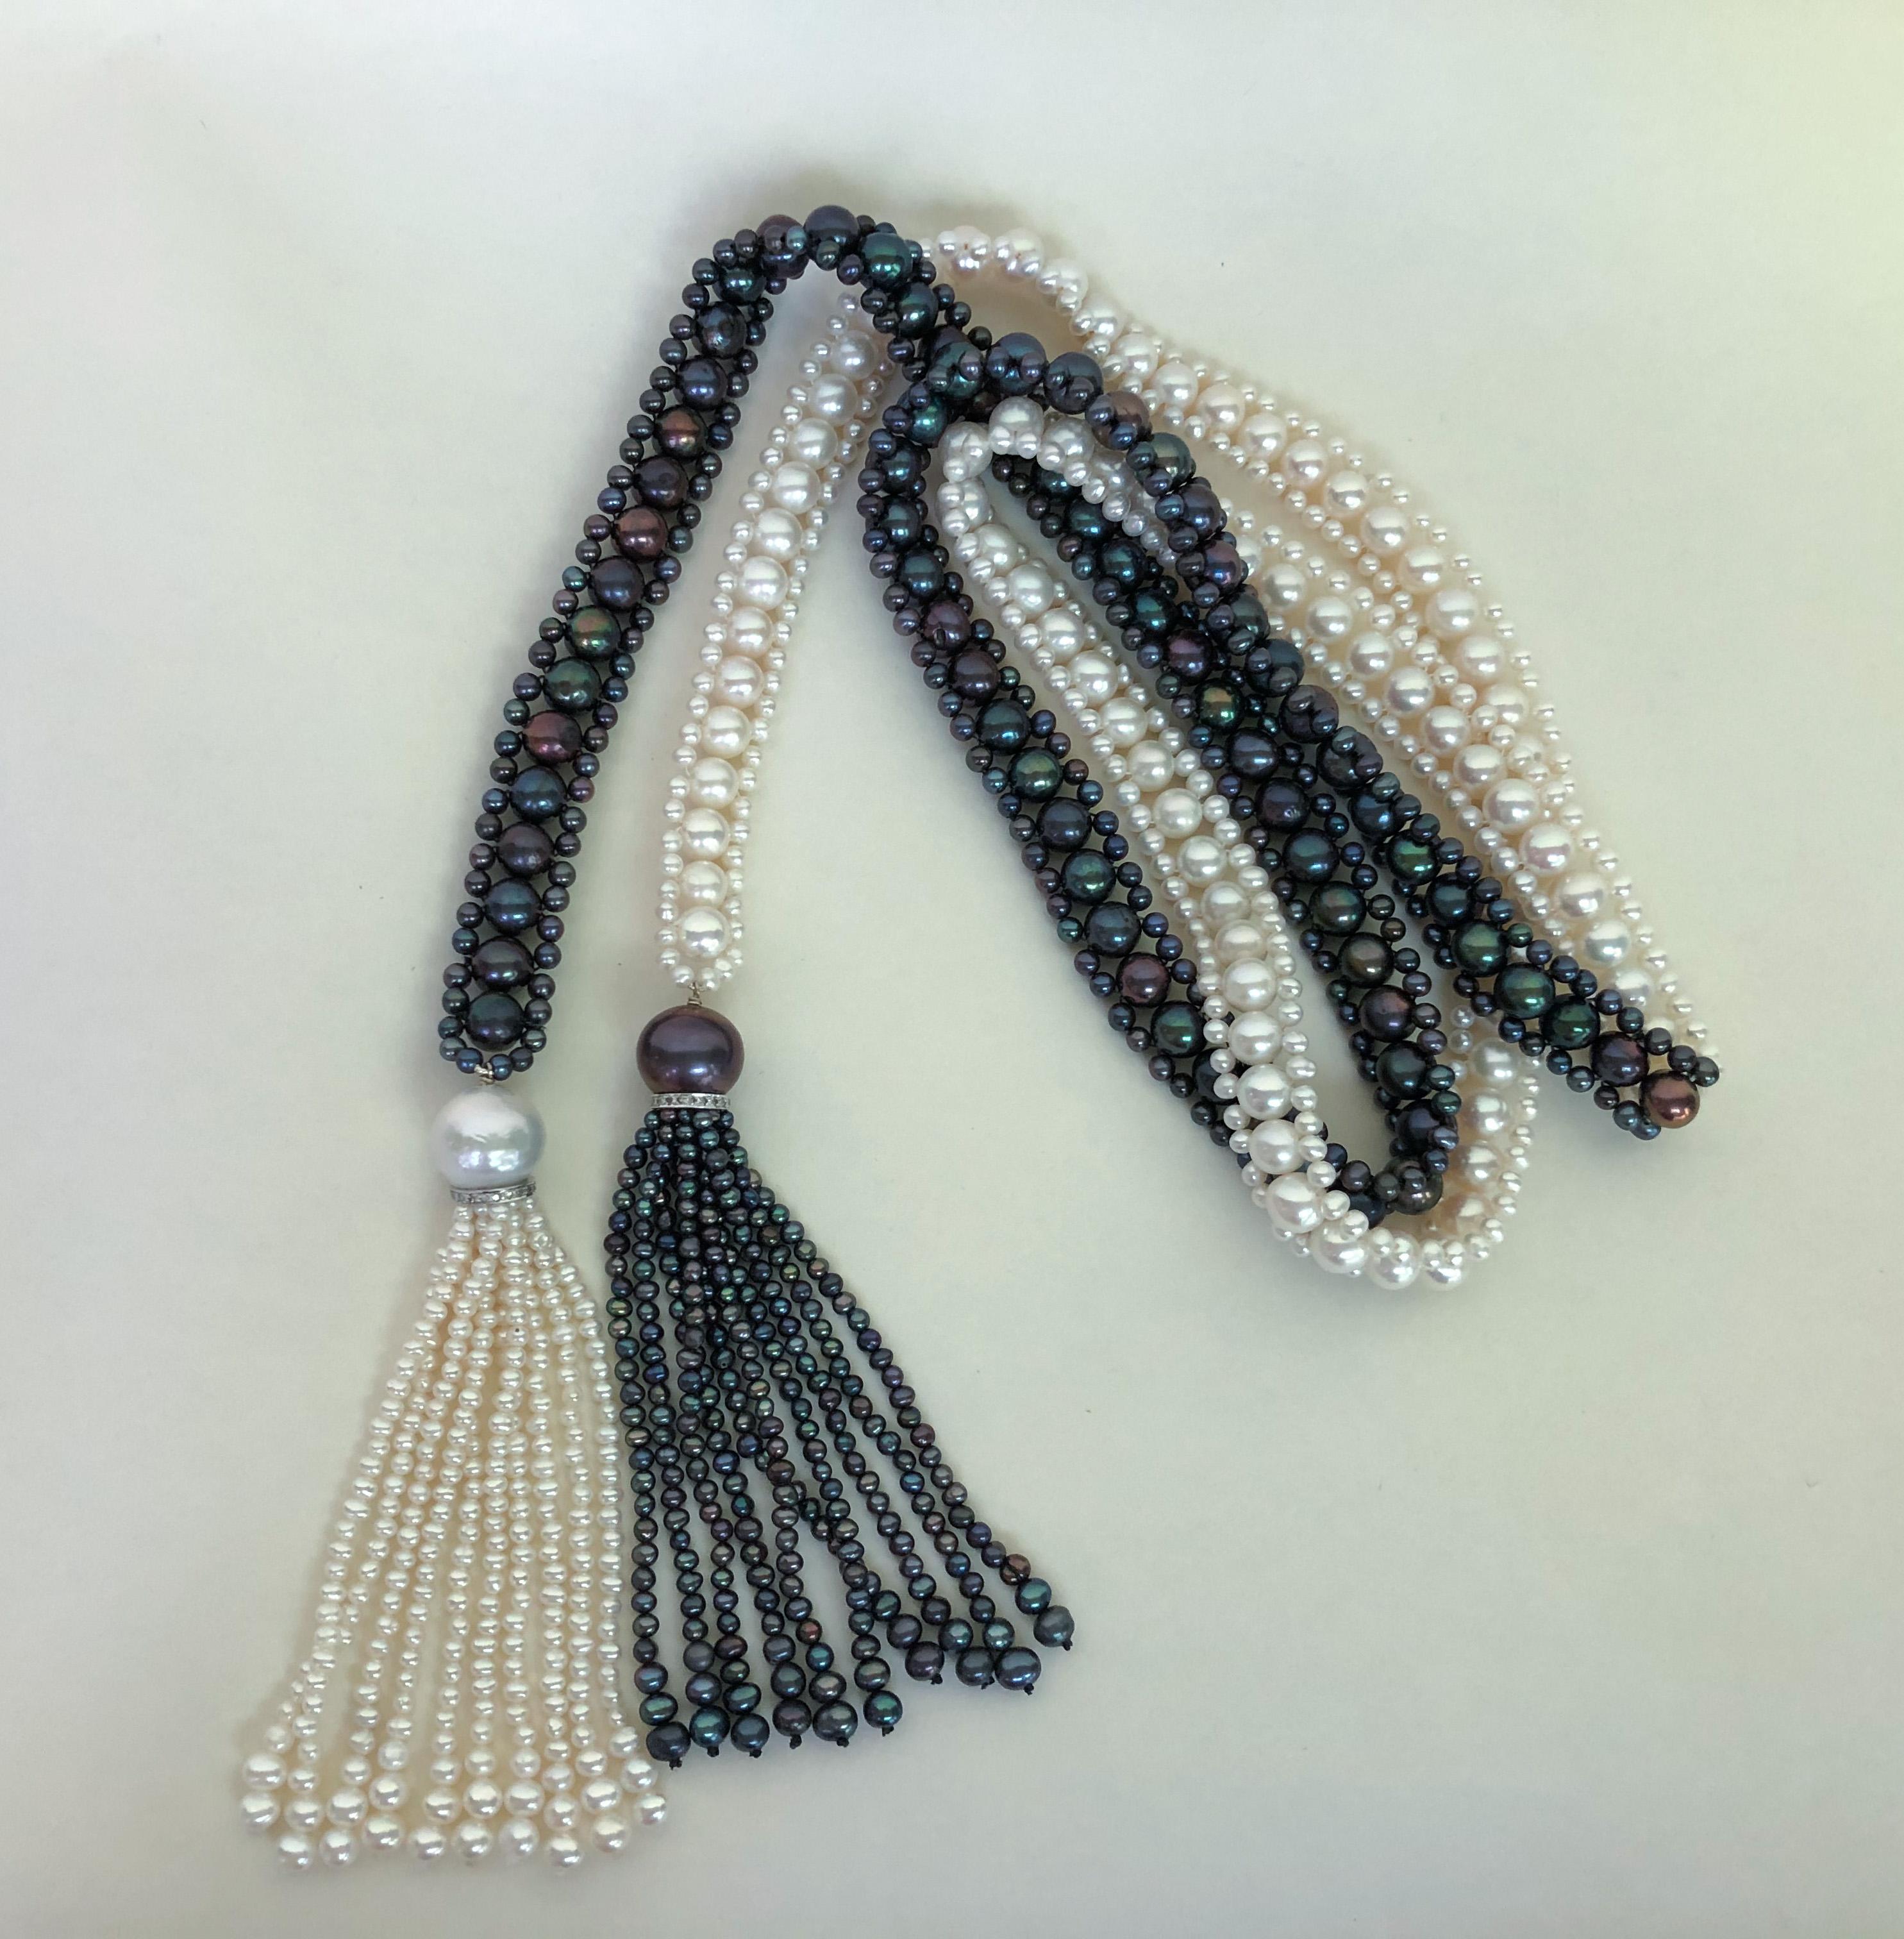 This beautiful and dramatic necklace draws its inspiration from the Art Deco color contrast and composition. This versatile necklace can be worn in a variety of different ways: long, wrapped, and tied, with or without brooch (brooch NOT included in